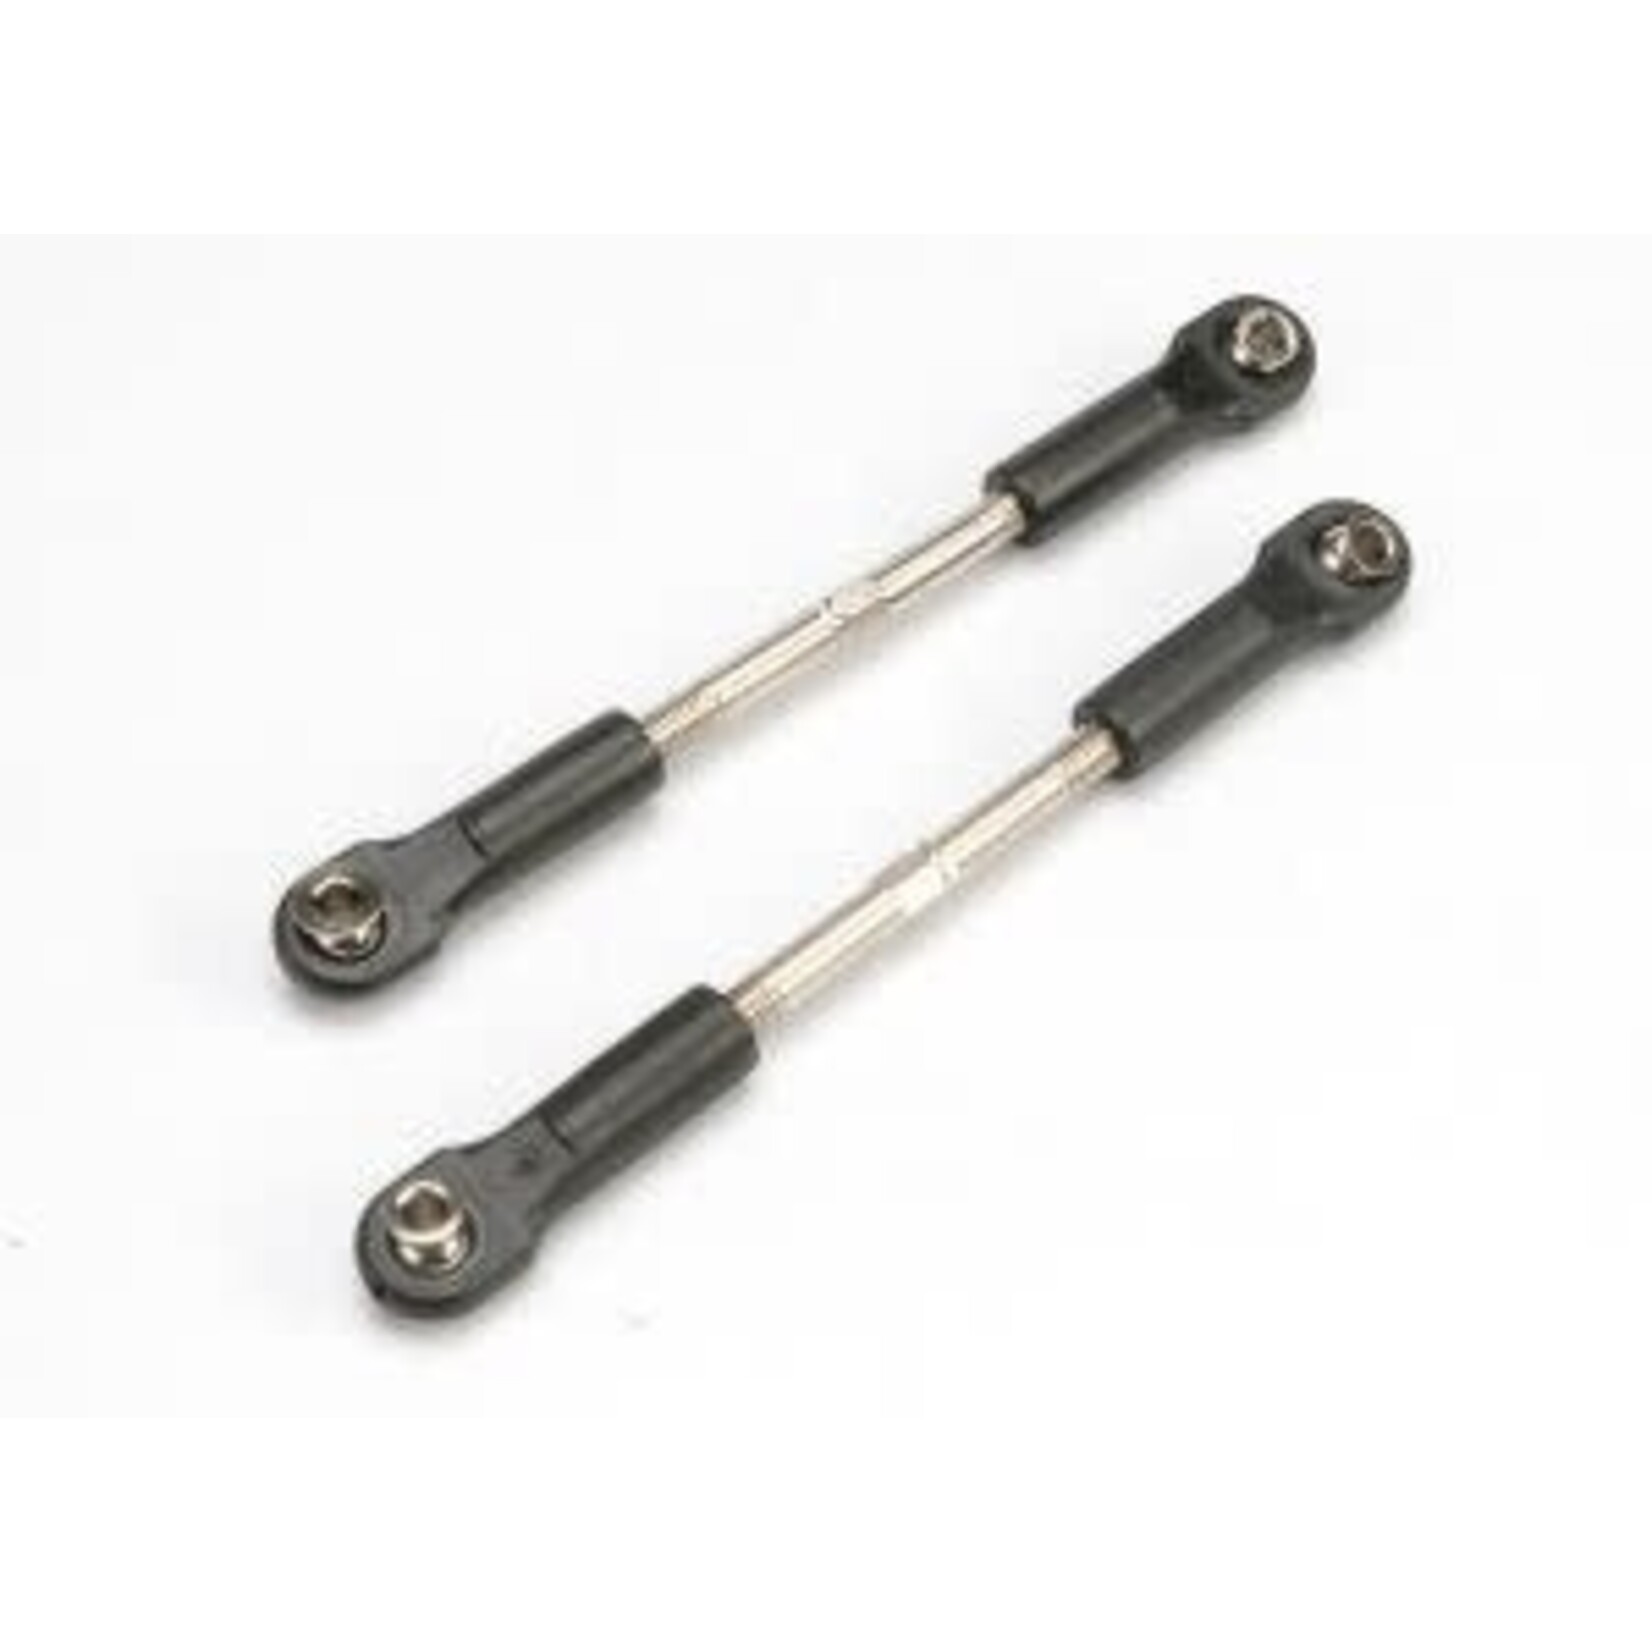 Traxxas 5539 Turnbuckles, camber links, 58mm (assembled with rod ends and hollow balls) (2)